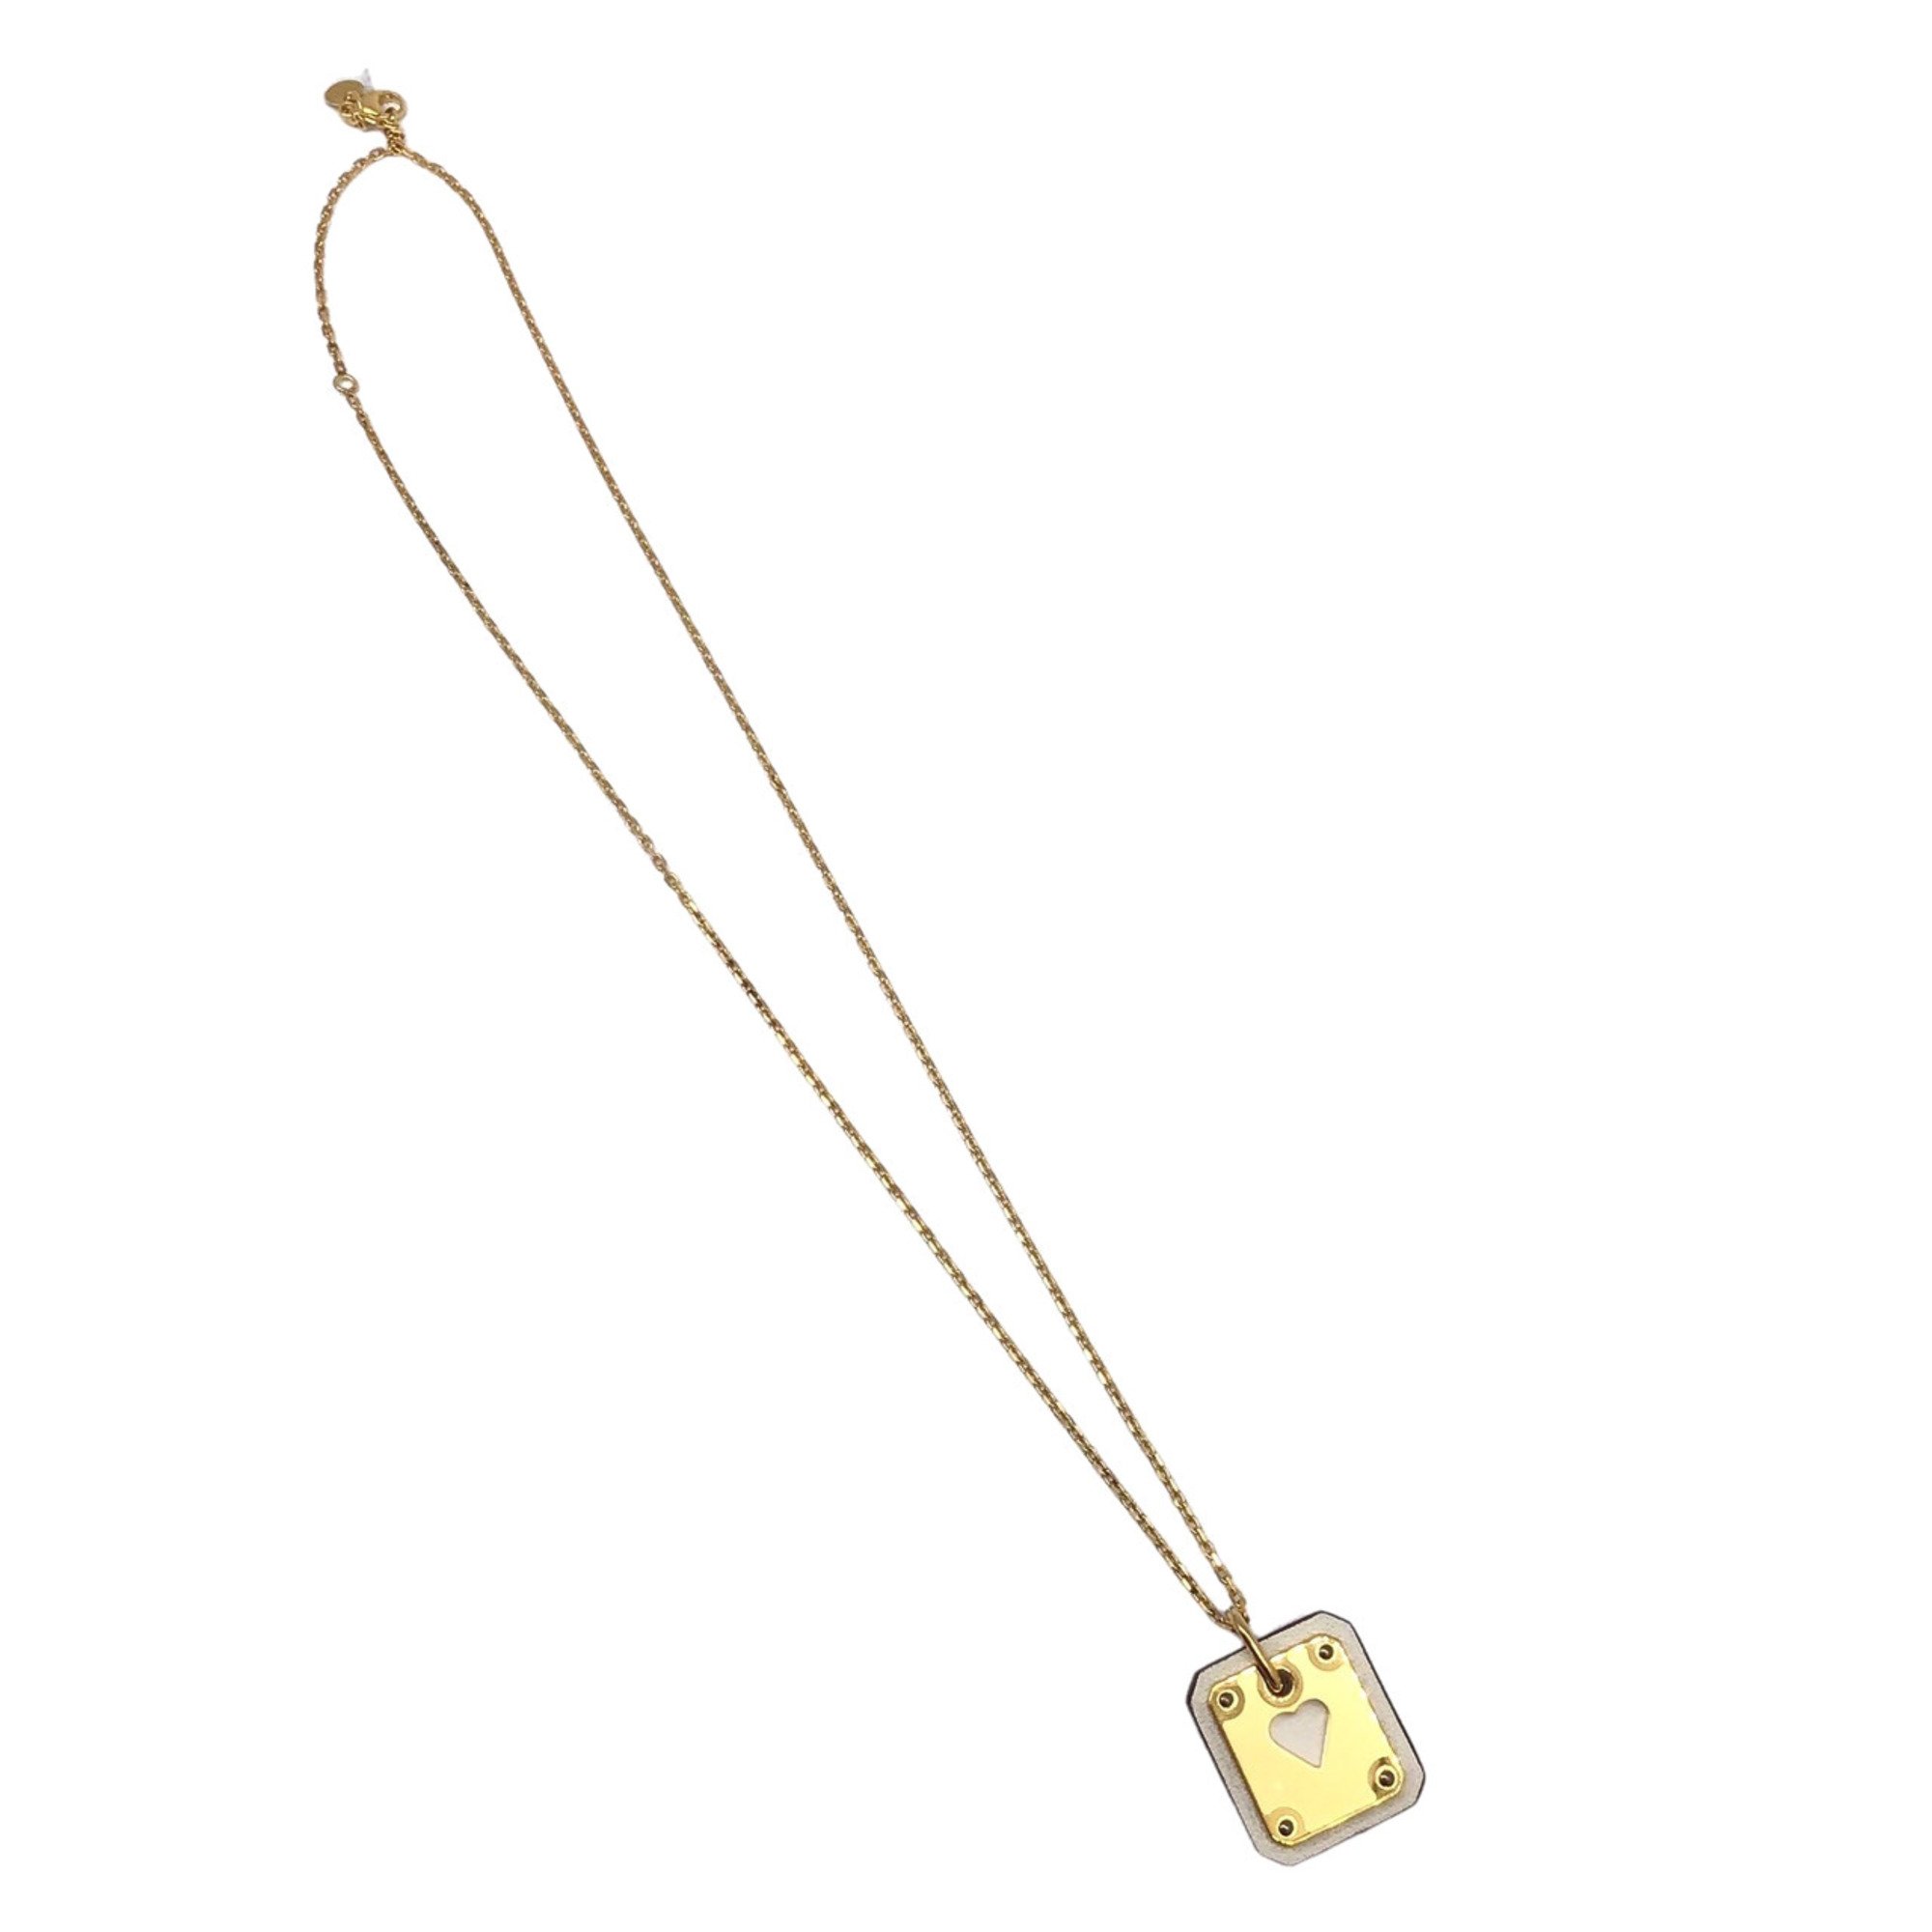 HERMES Ass de Coeur PM Ace of Heart Necklace Y Engraved (2020) Gold Accessory Fashion Women's Wrapping